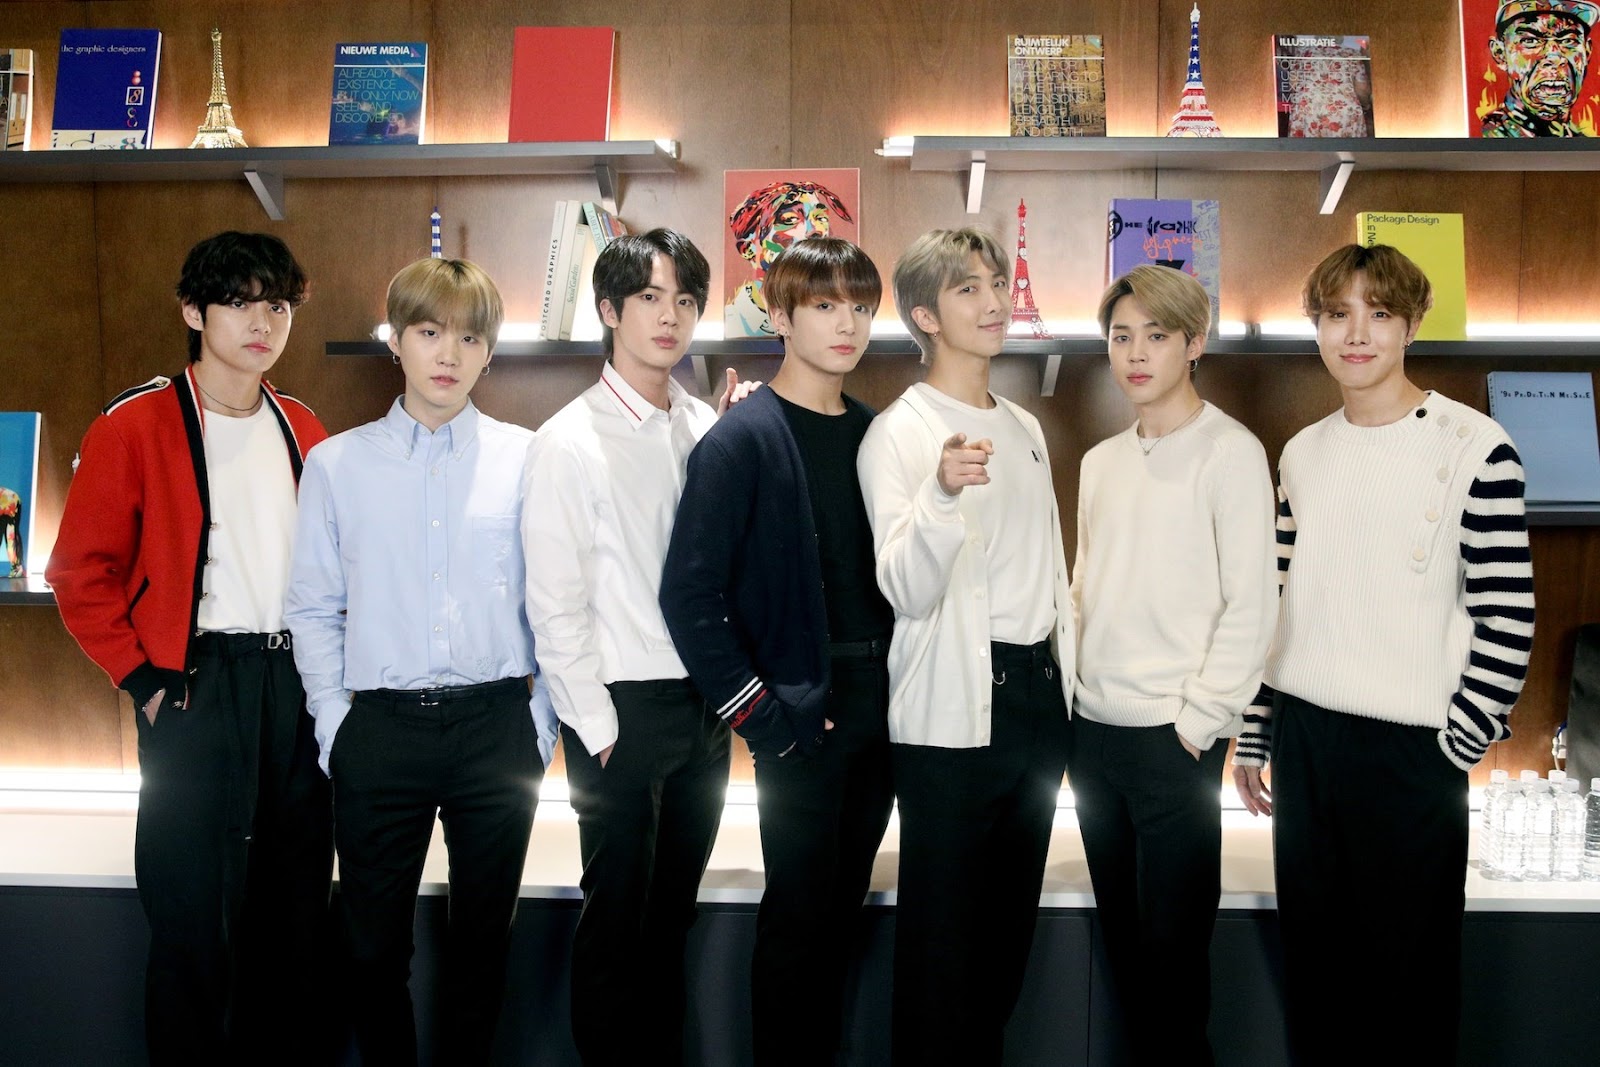 BTS Collaborates with Starbucks Korea for 'Be the Brightest Stars' Campaign